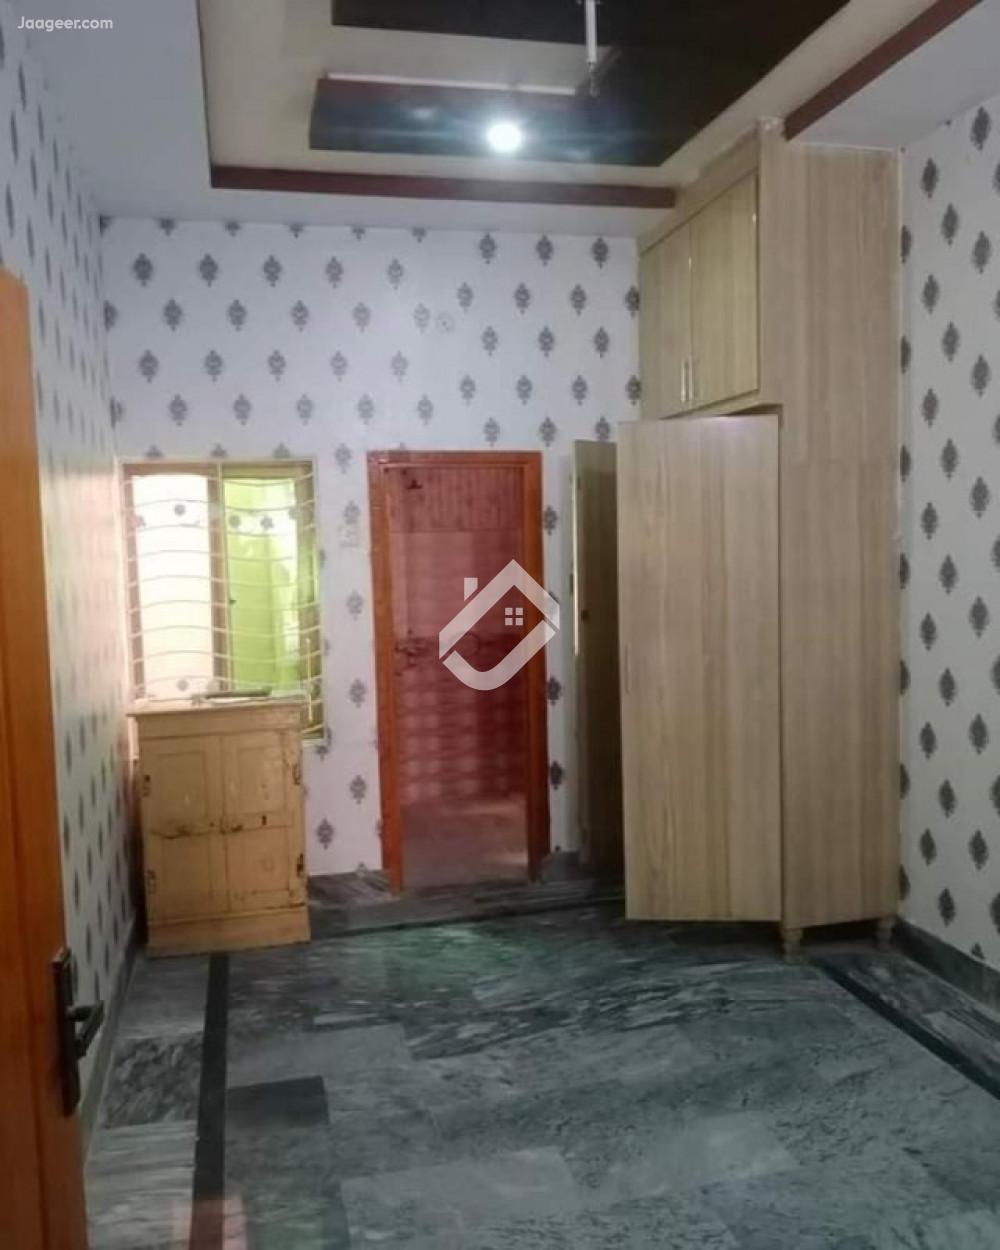 View  5 Marla Double Storey House For Sale In Khayaban E Sadiq  in Khayaban E Sadiq, Sargodha